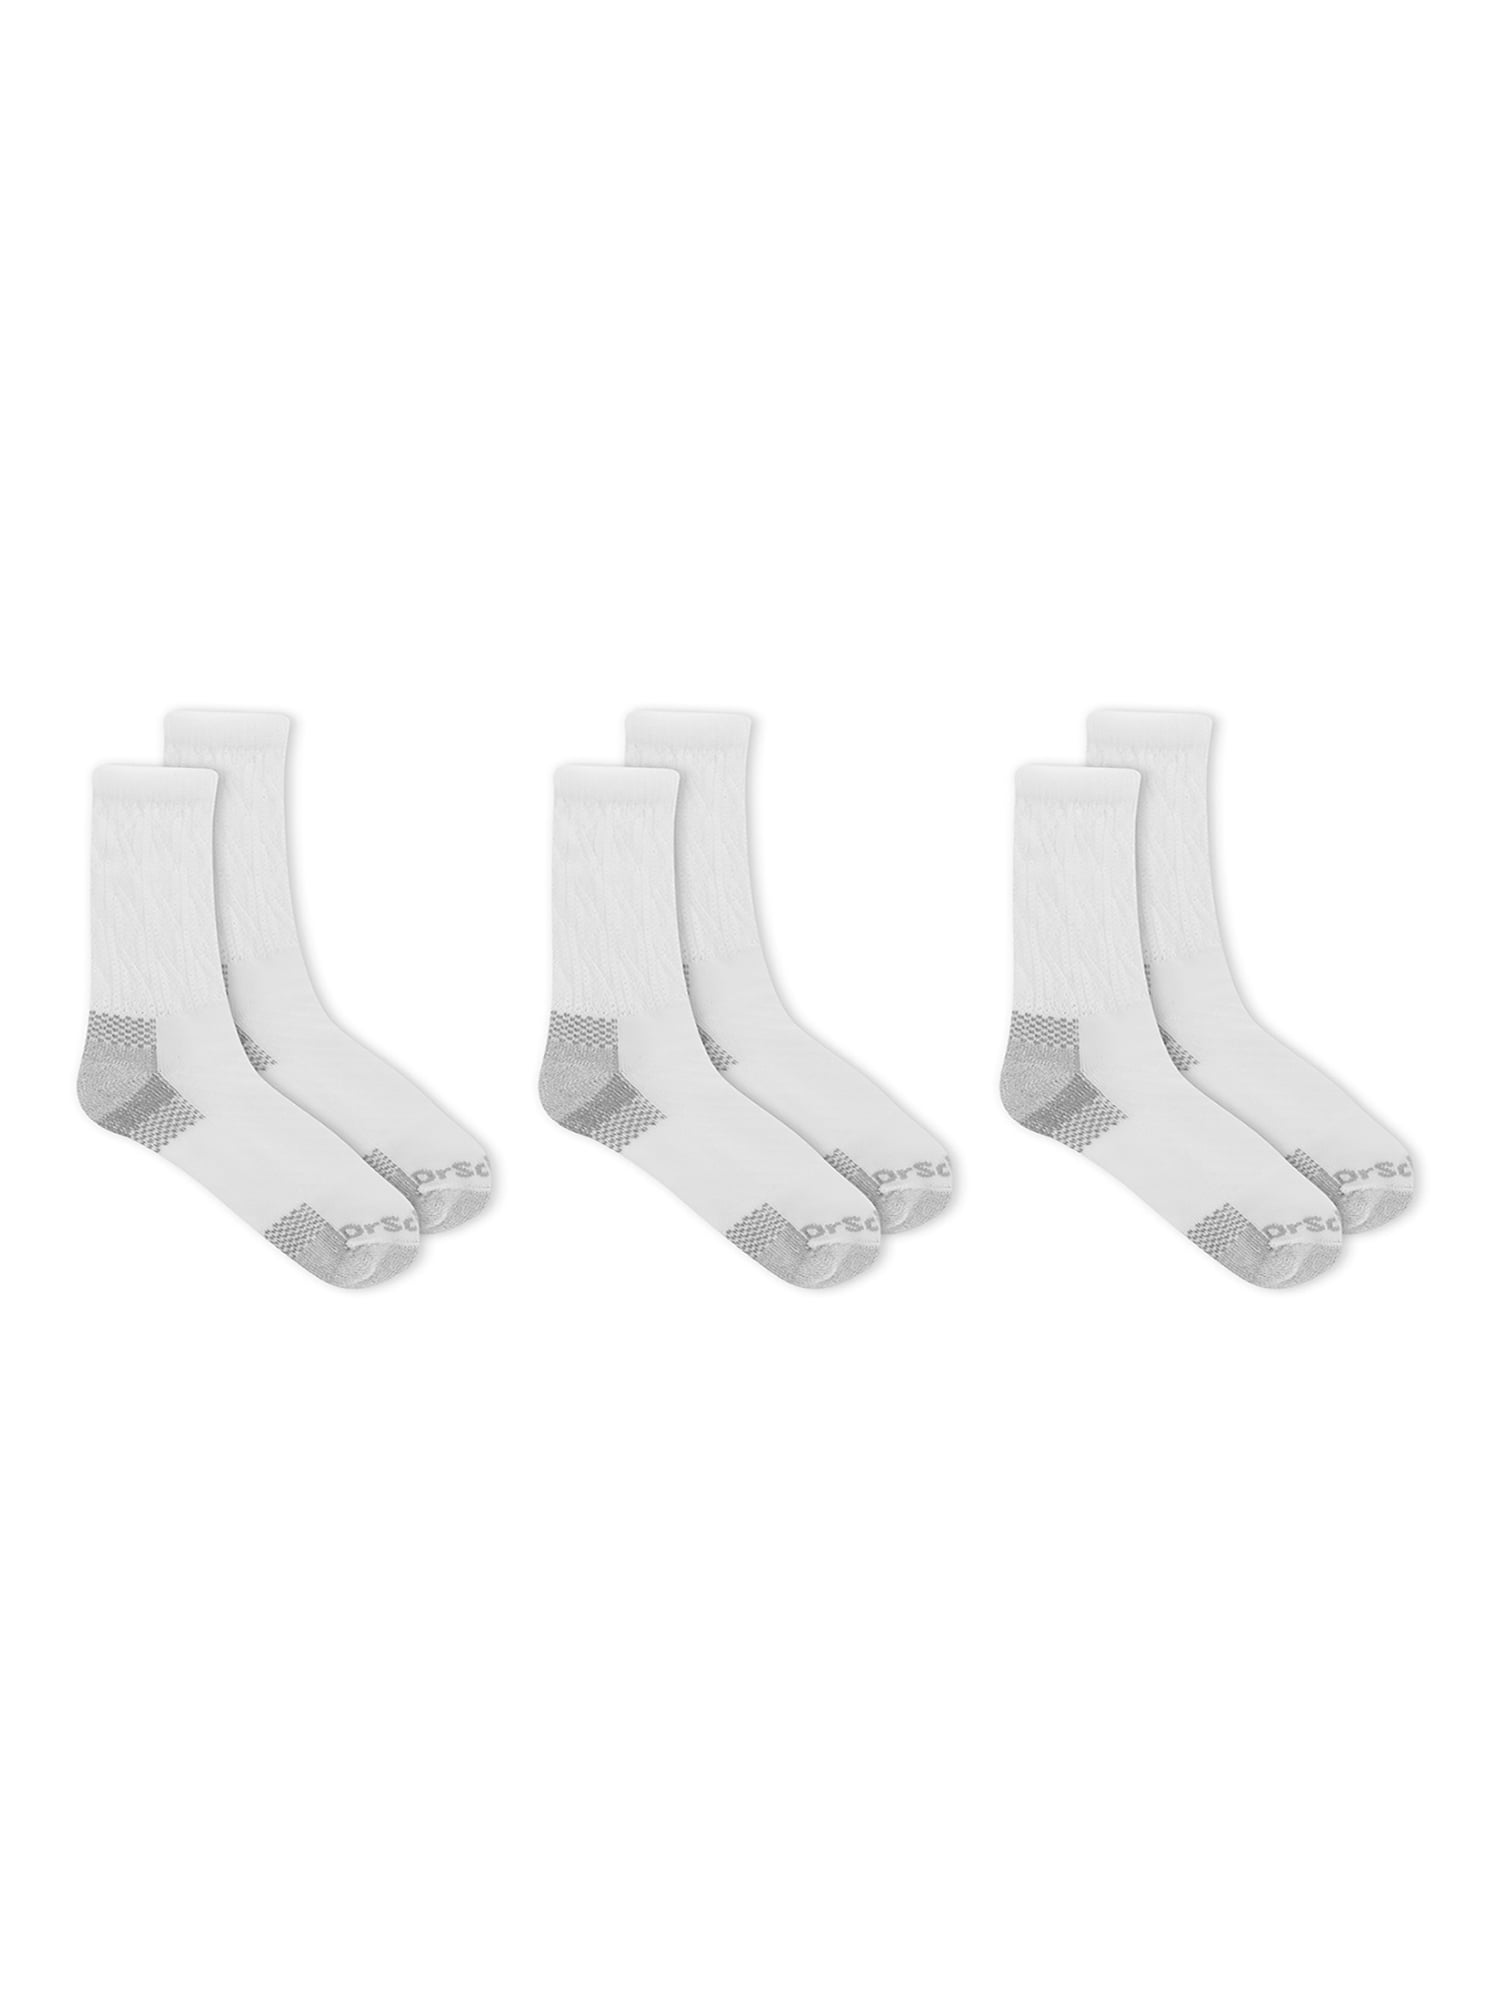 Dr. Scholl's Women's Advanced Relief Blister Guard Crew Socks, 3 Pack